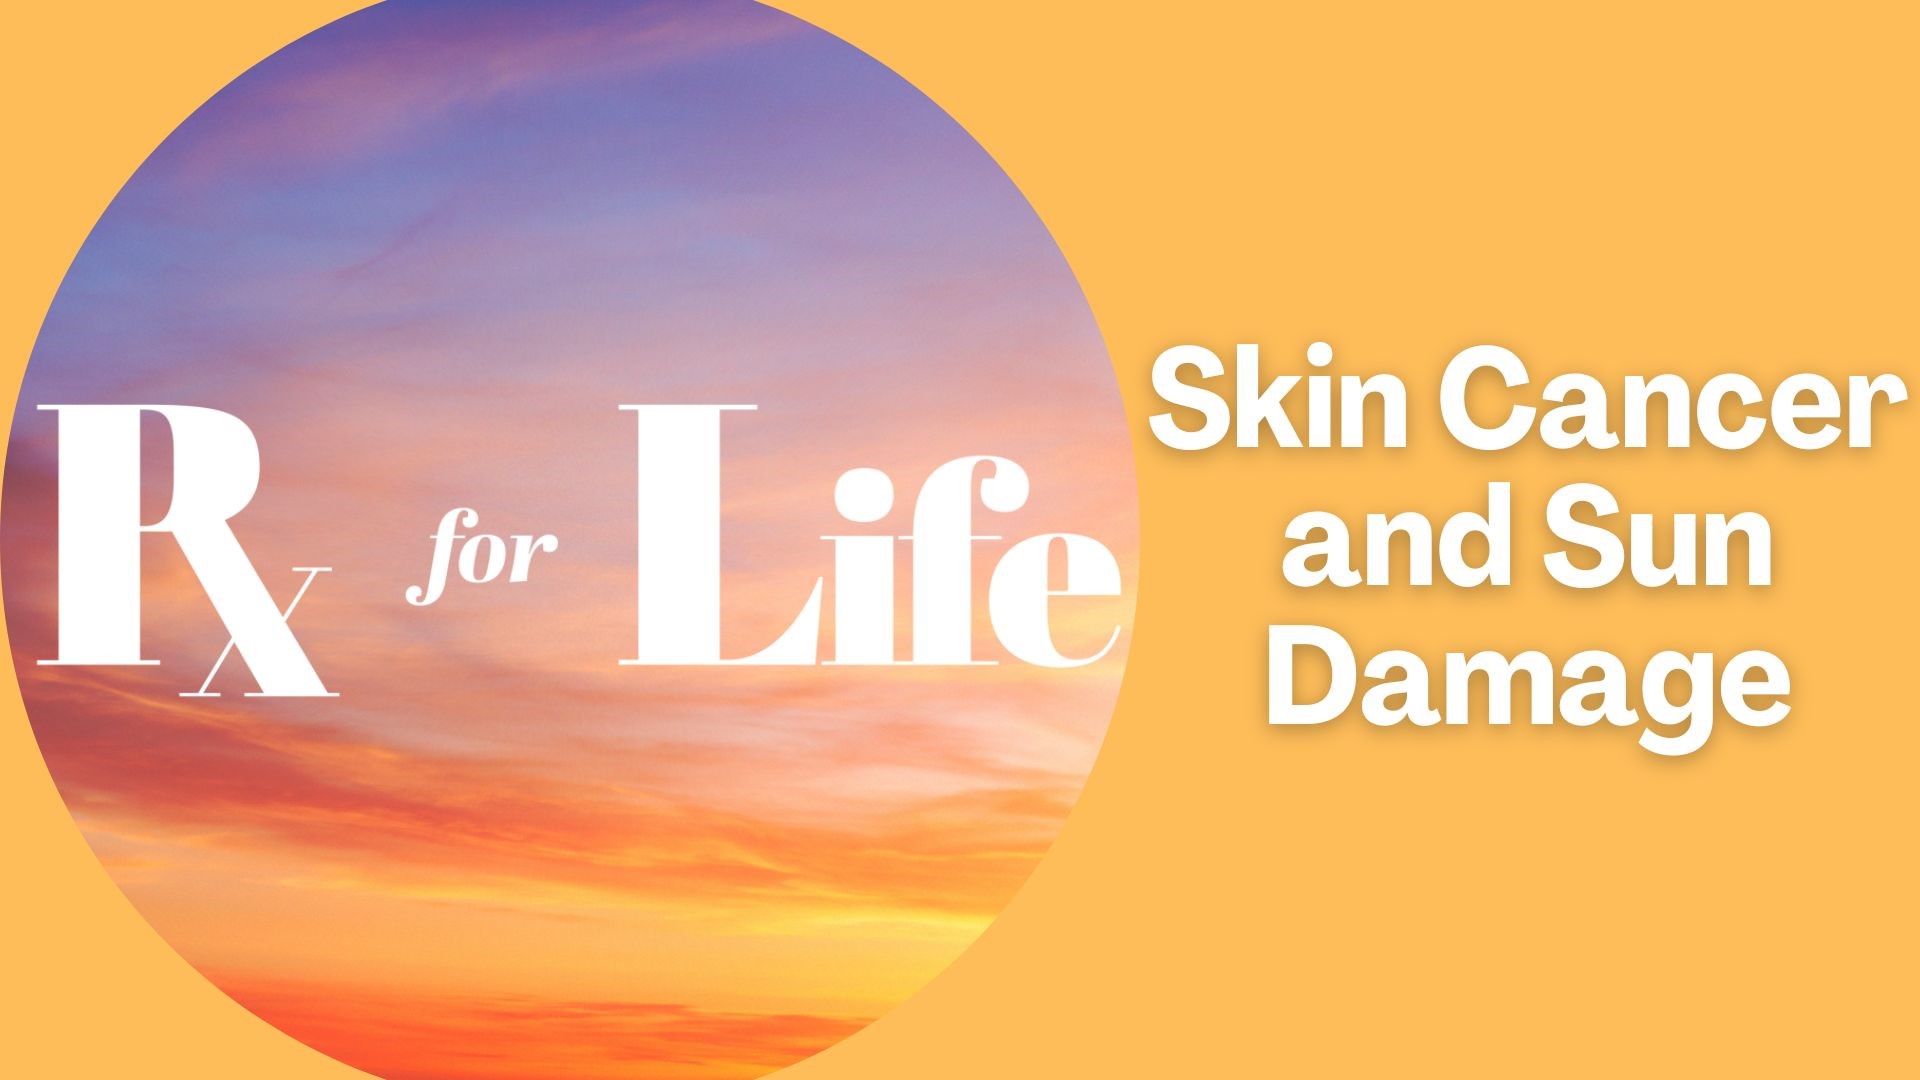 May is skin cancer awareness month. Monica Robins sits down with an expert on how to best take care of your skin during the summer months and avoid sun damage.